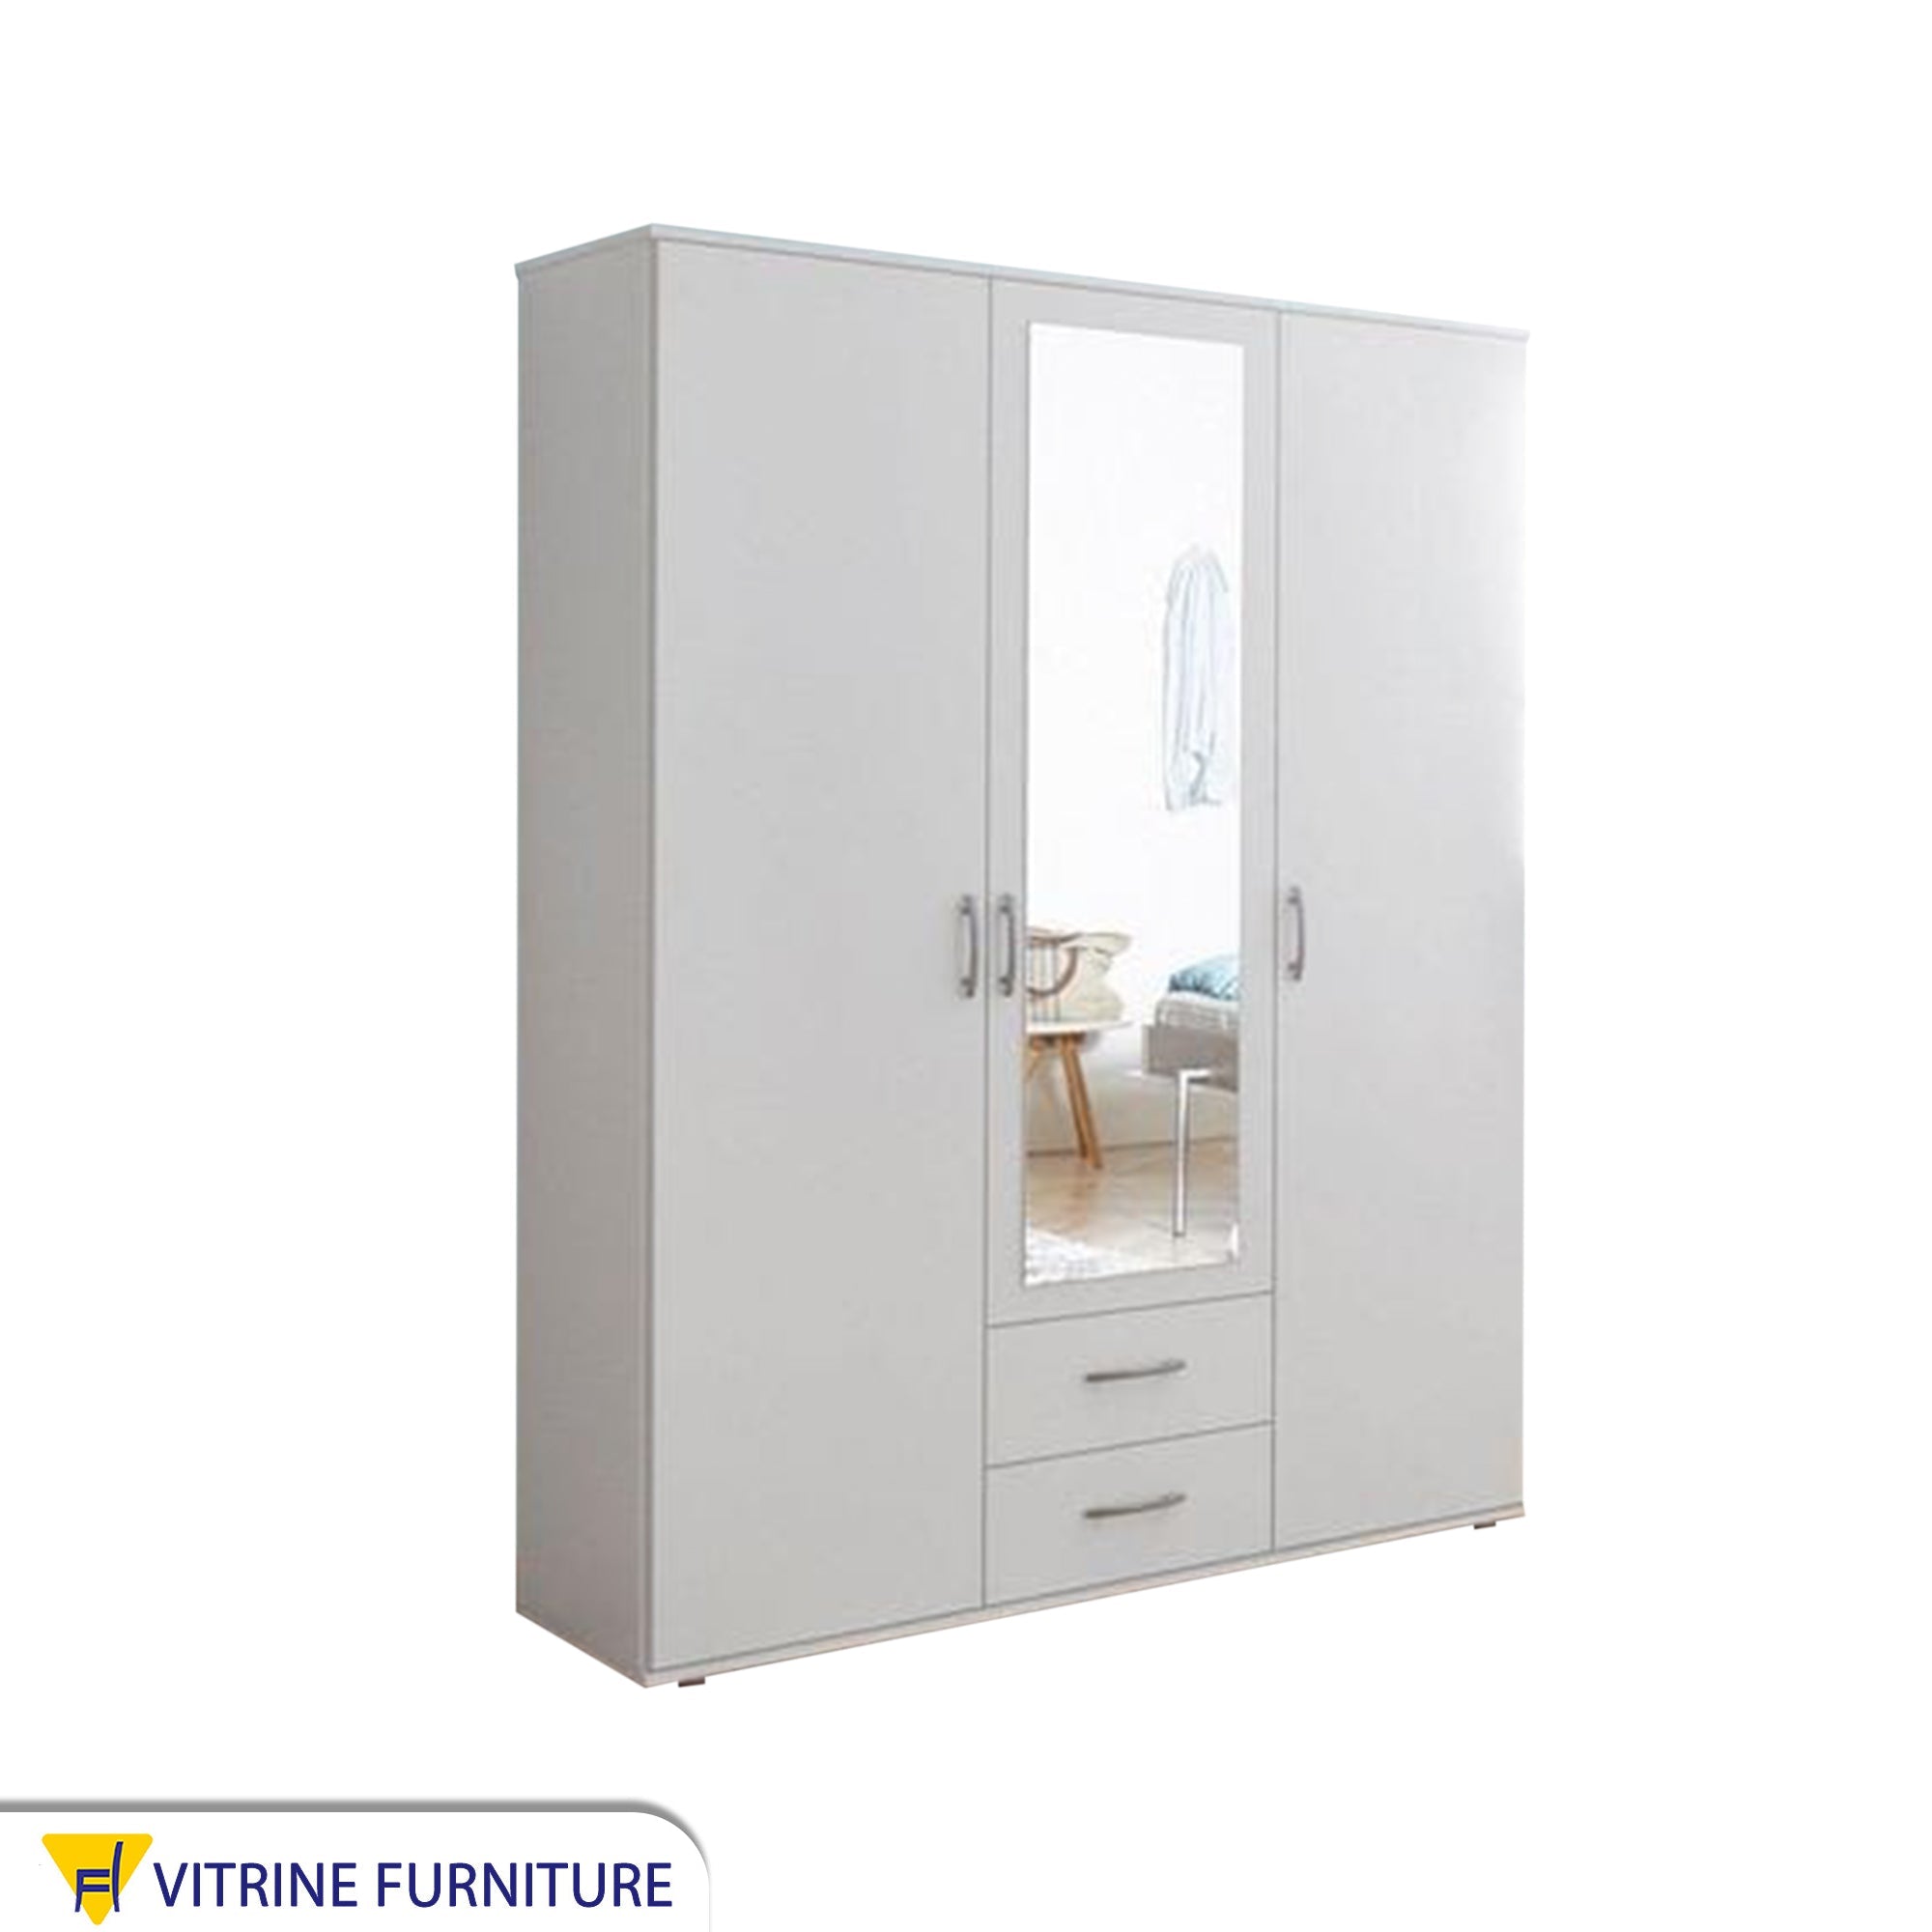 White cupboard with silver handle